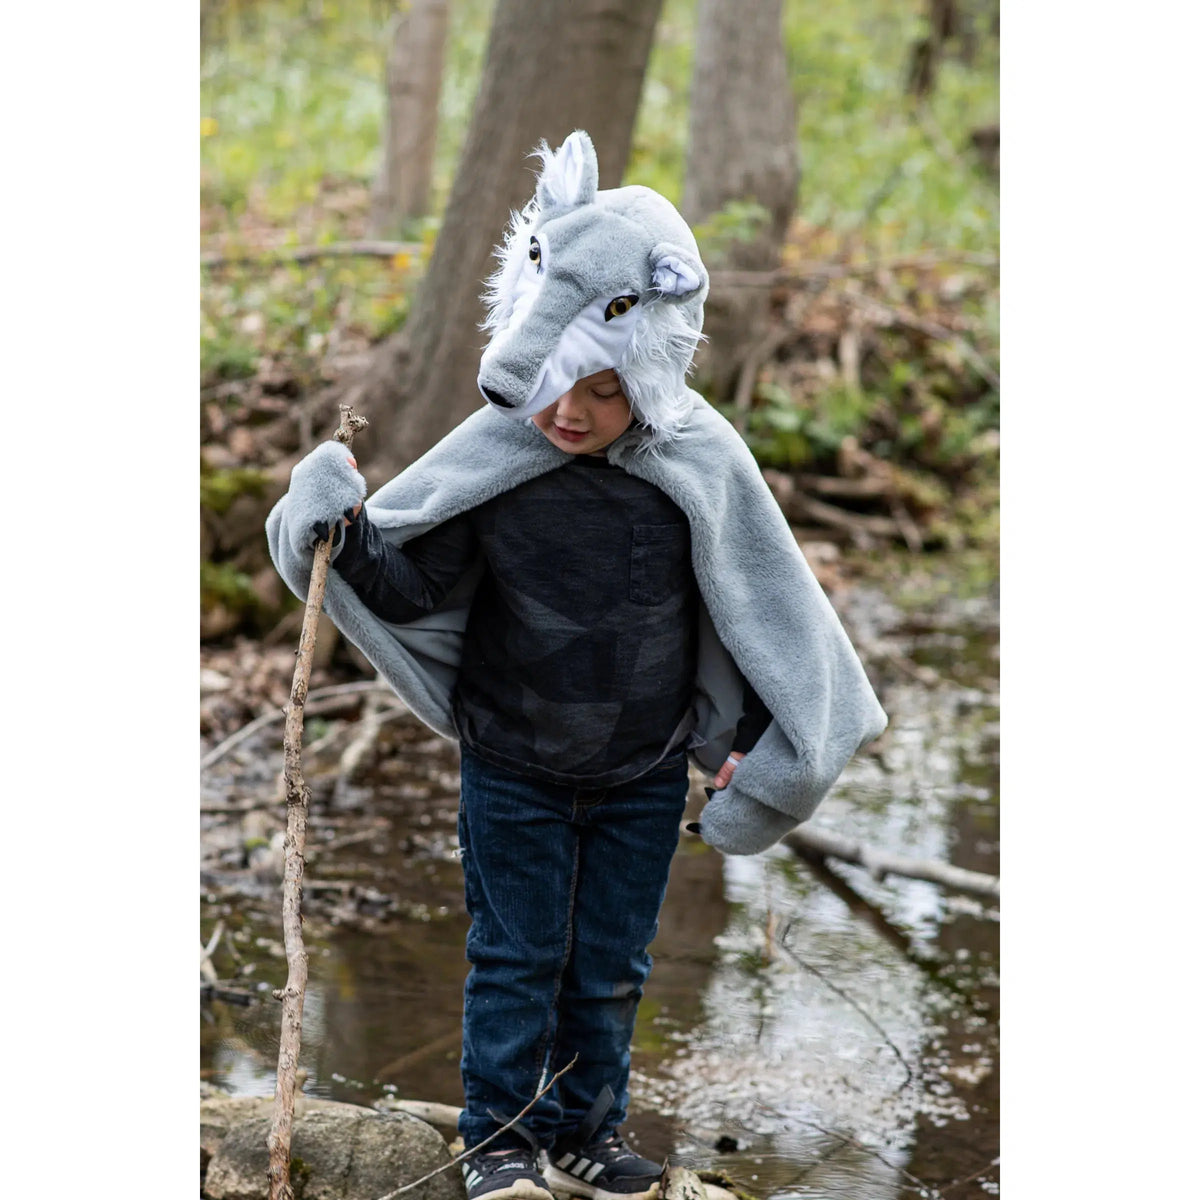 Child in woods, wearing a grey and white wolf cape, with a staff in a creek.